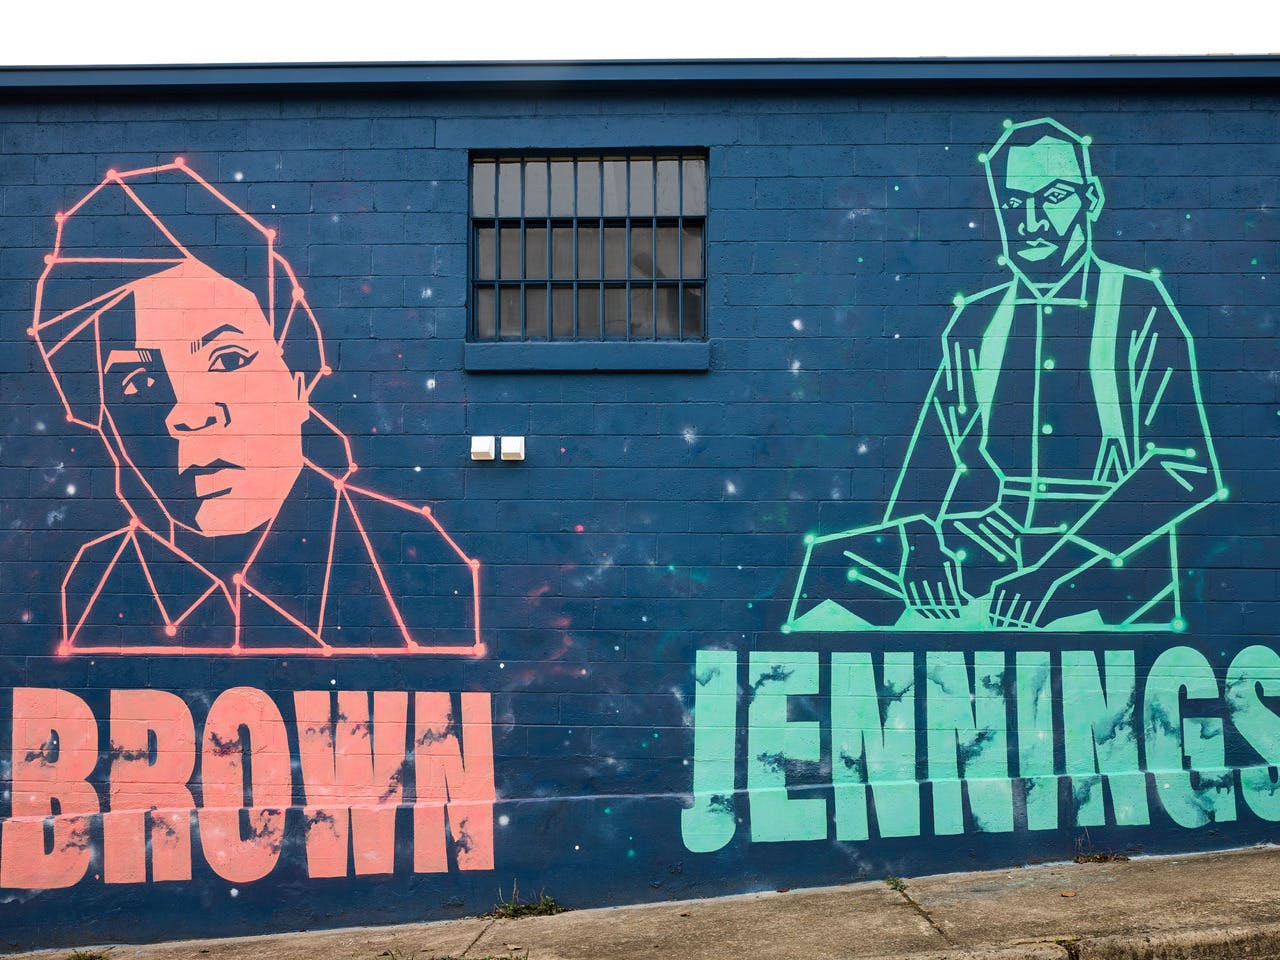 A mural depicts two black inventors and entrepreneurs on a blue exterior wall.